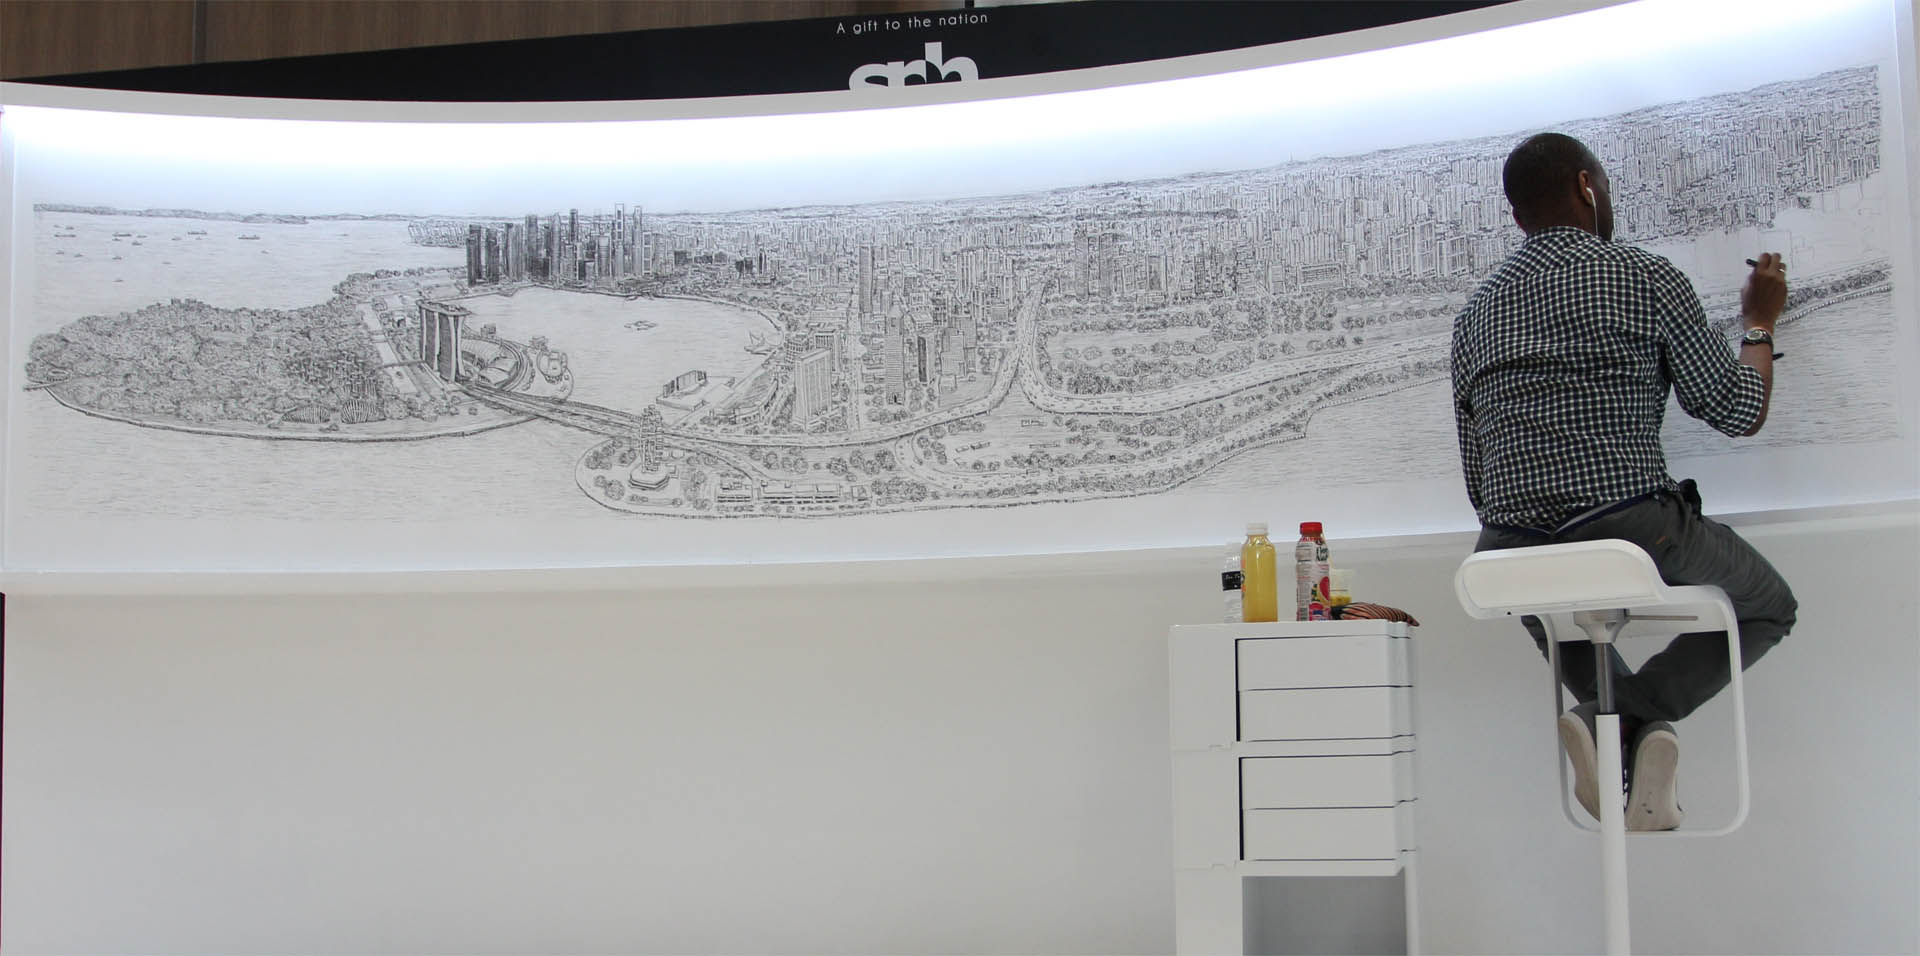 Here Stephen works on one of his stunning panoramas - this time Singapore - but other cities under his watchful eye have included Tokyo, Rome, Madrid, Dubai, Jerusalem, and London.